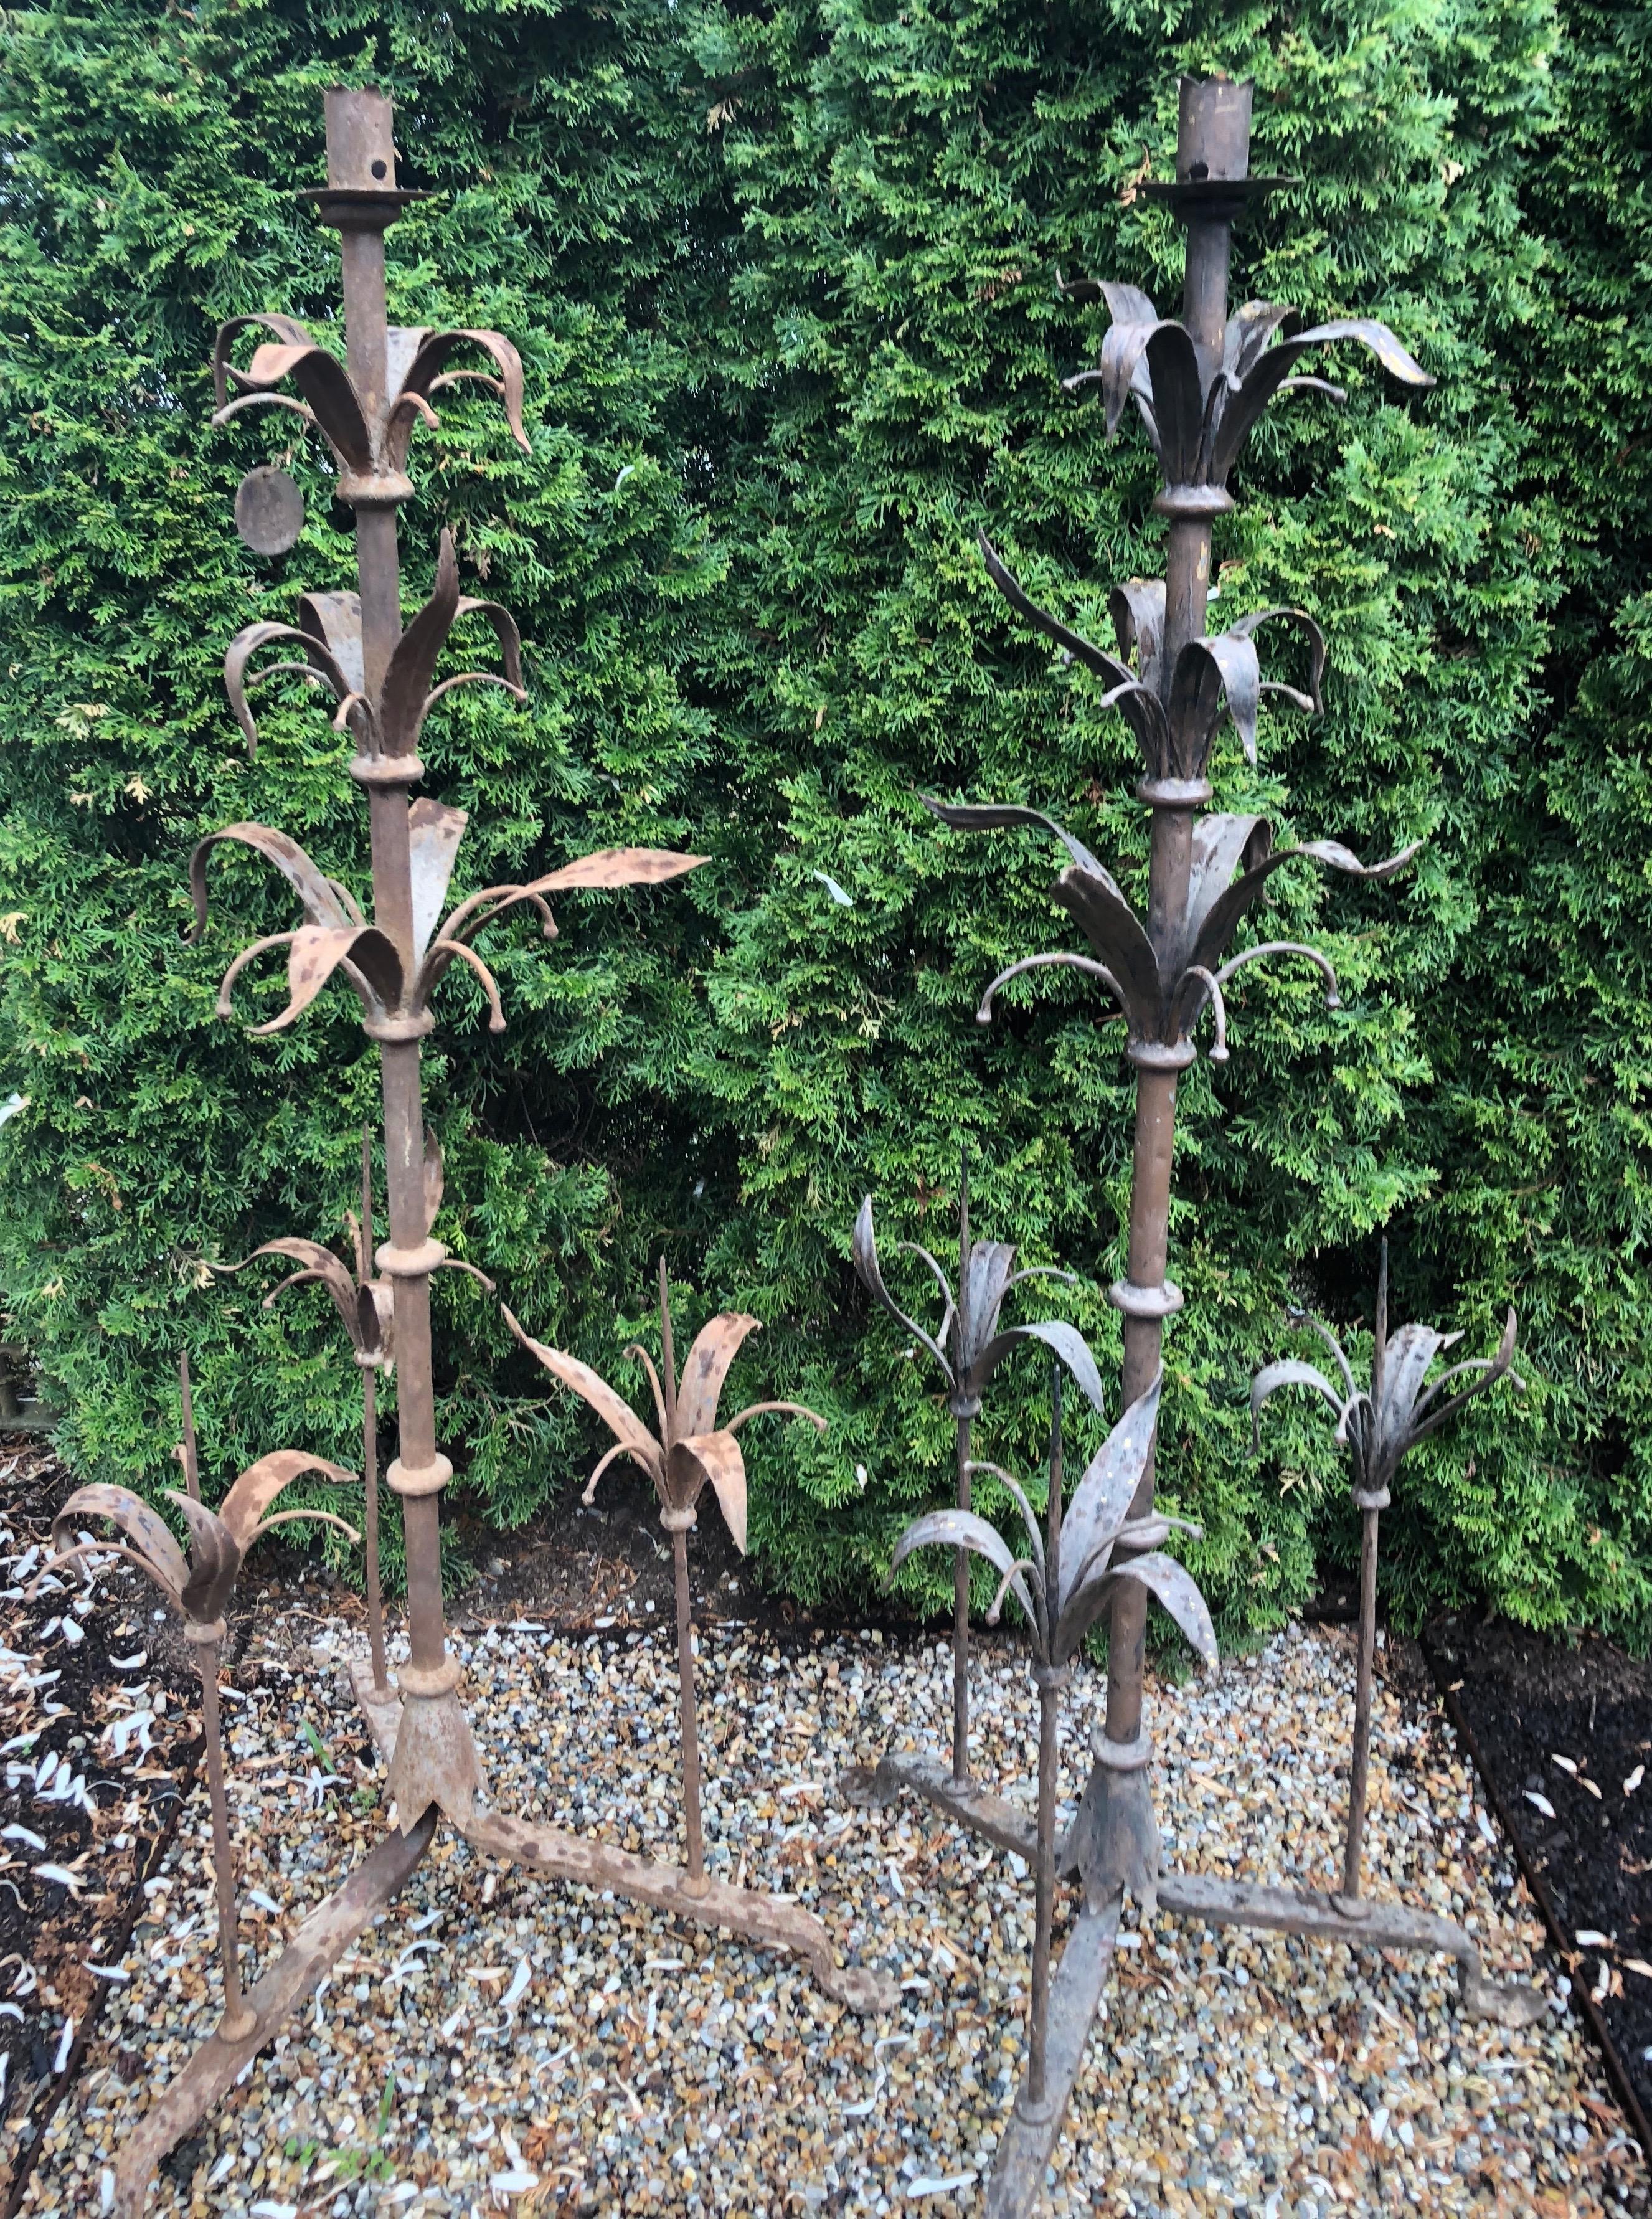 These leaf-motif candelabra are simply stunning. In an old rusty surface with traces of gilding on some leaves, they would be magnificent converted into standing lamps with large cylindrical shades. Their detail is exceptional and their presence